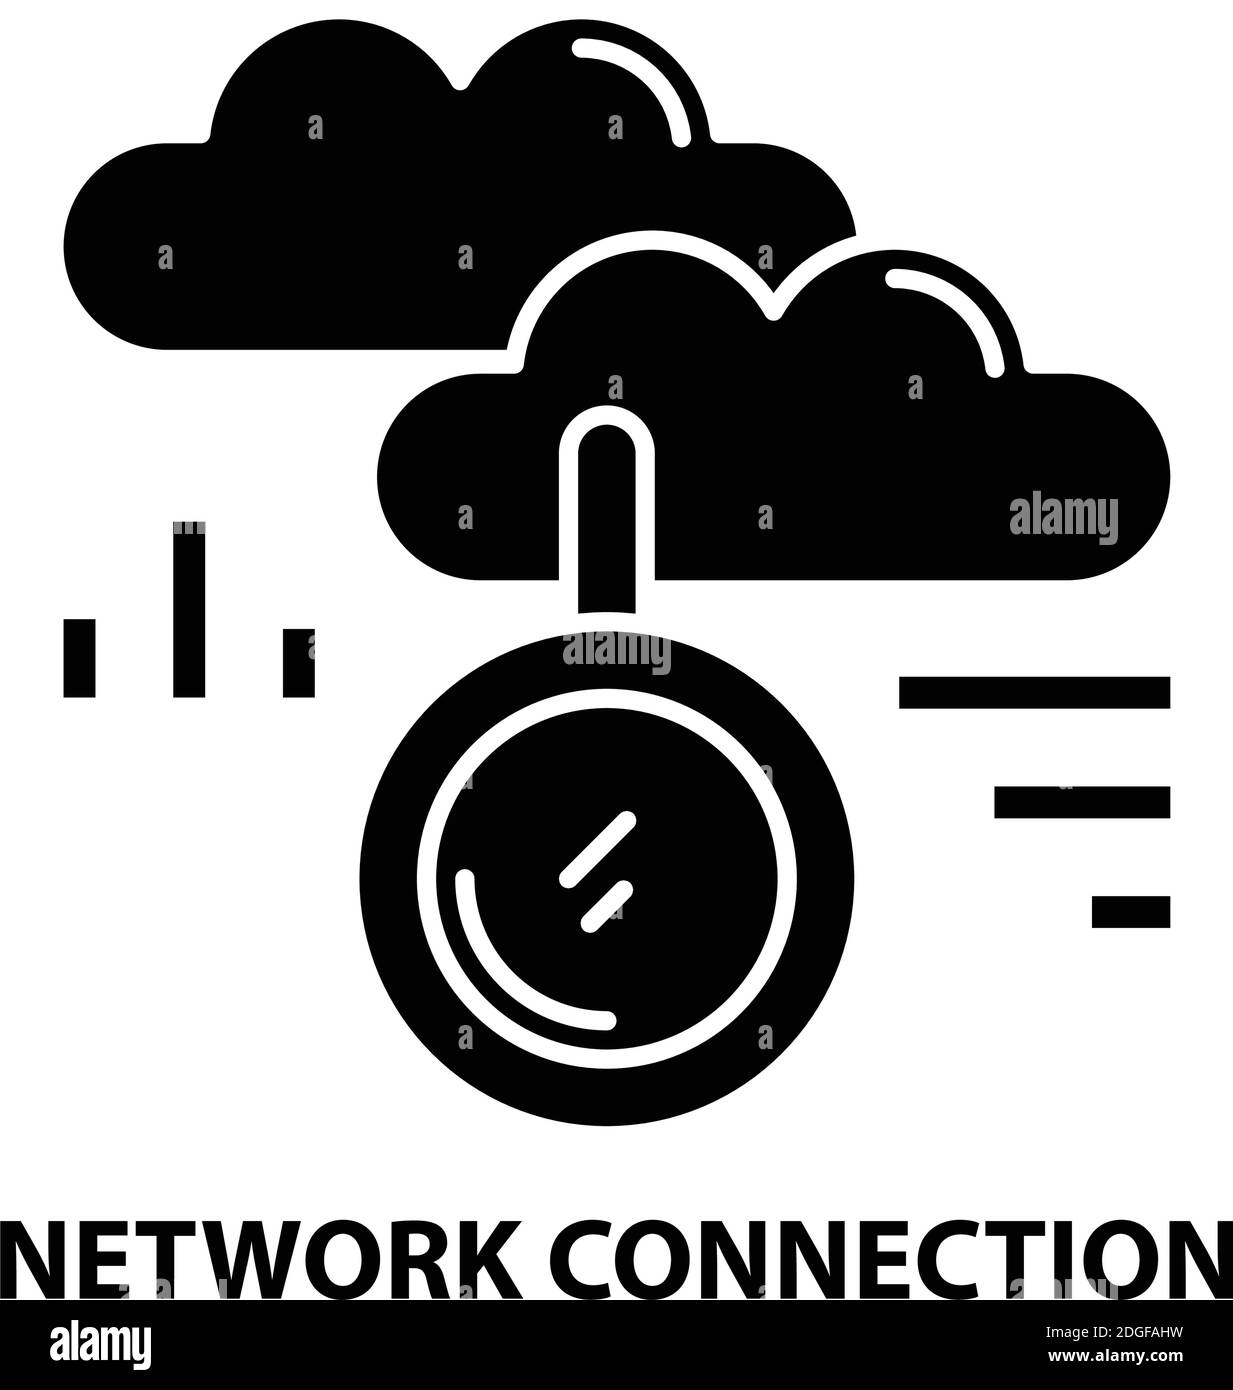 network connection symbol icon, black vector sign with editable strokes, concept illustration Stock Vector